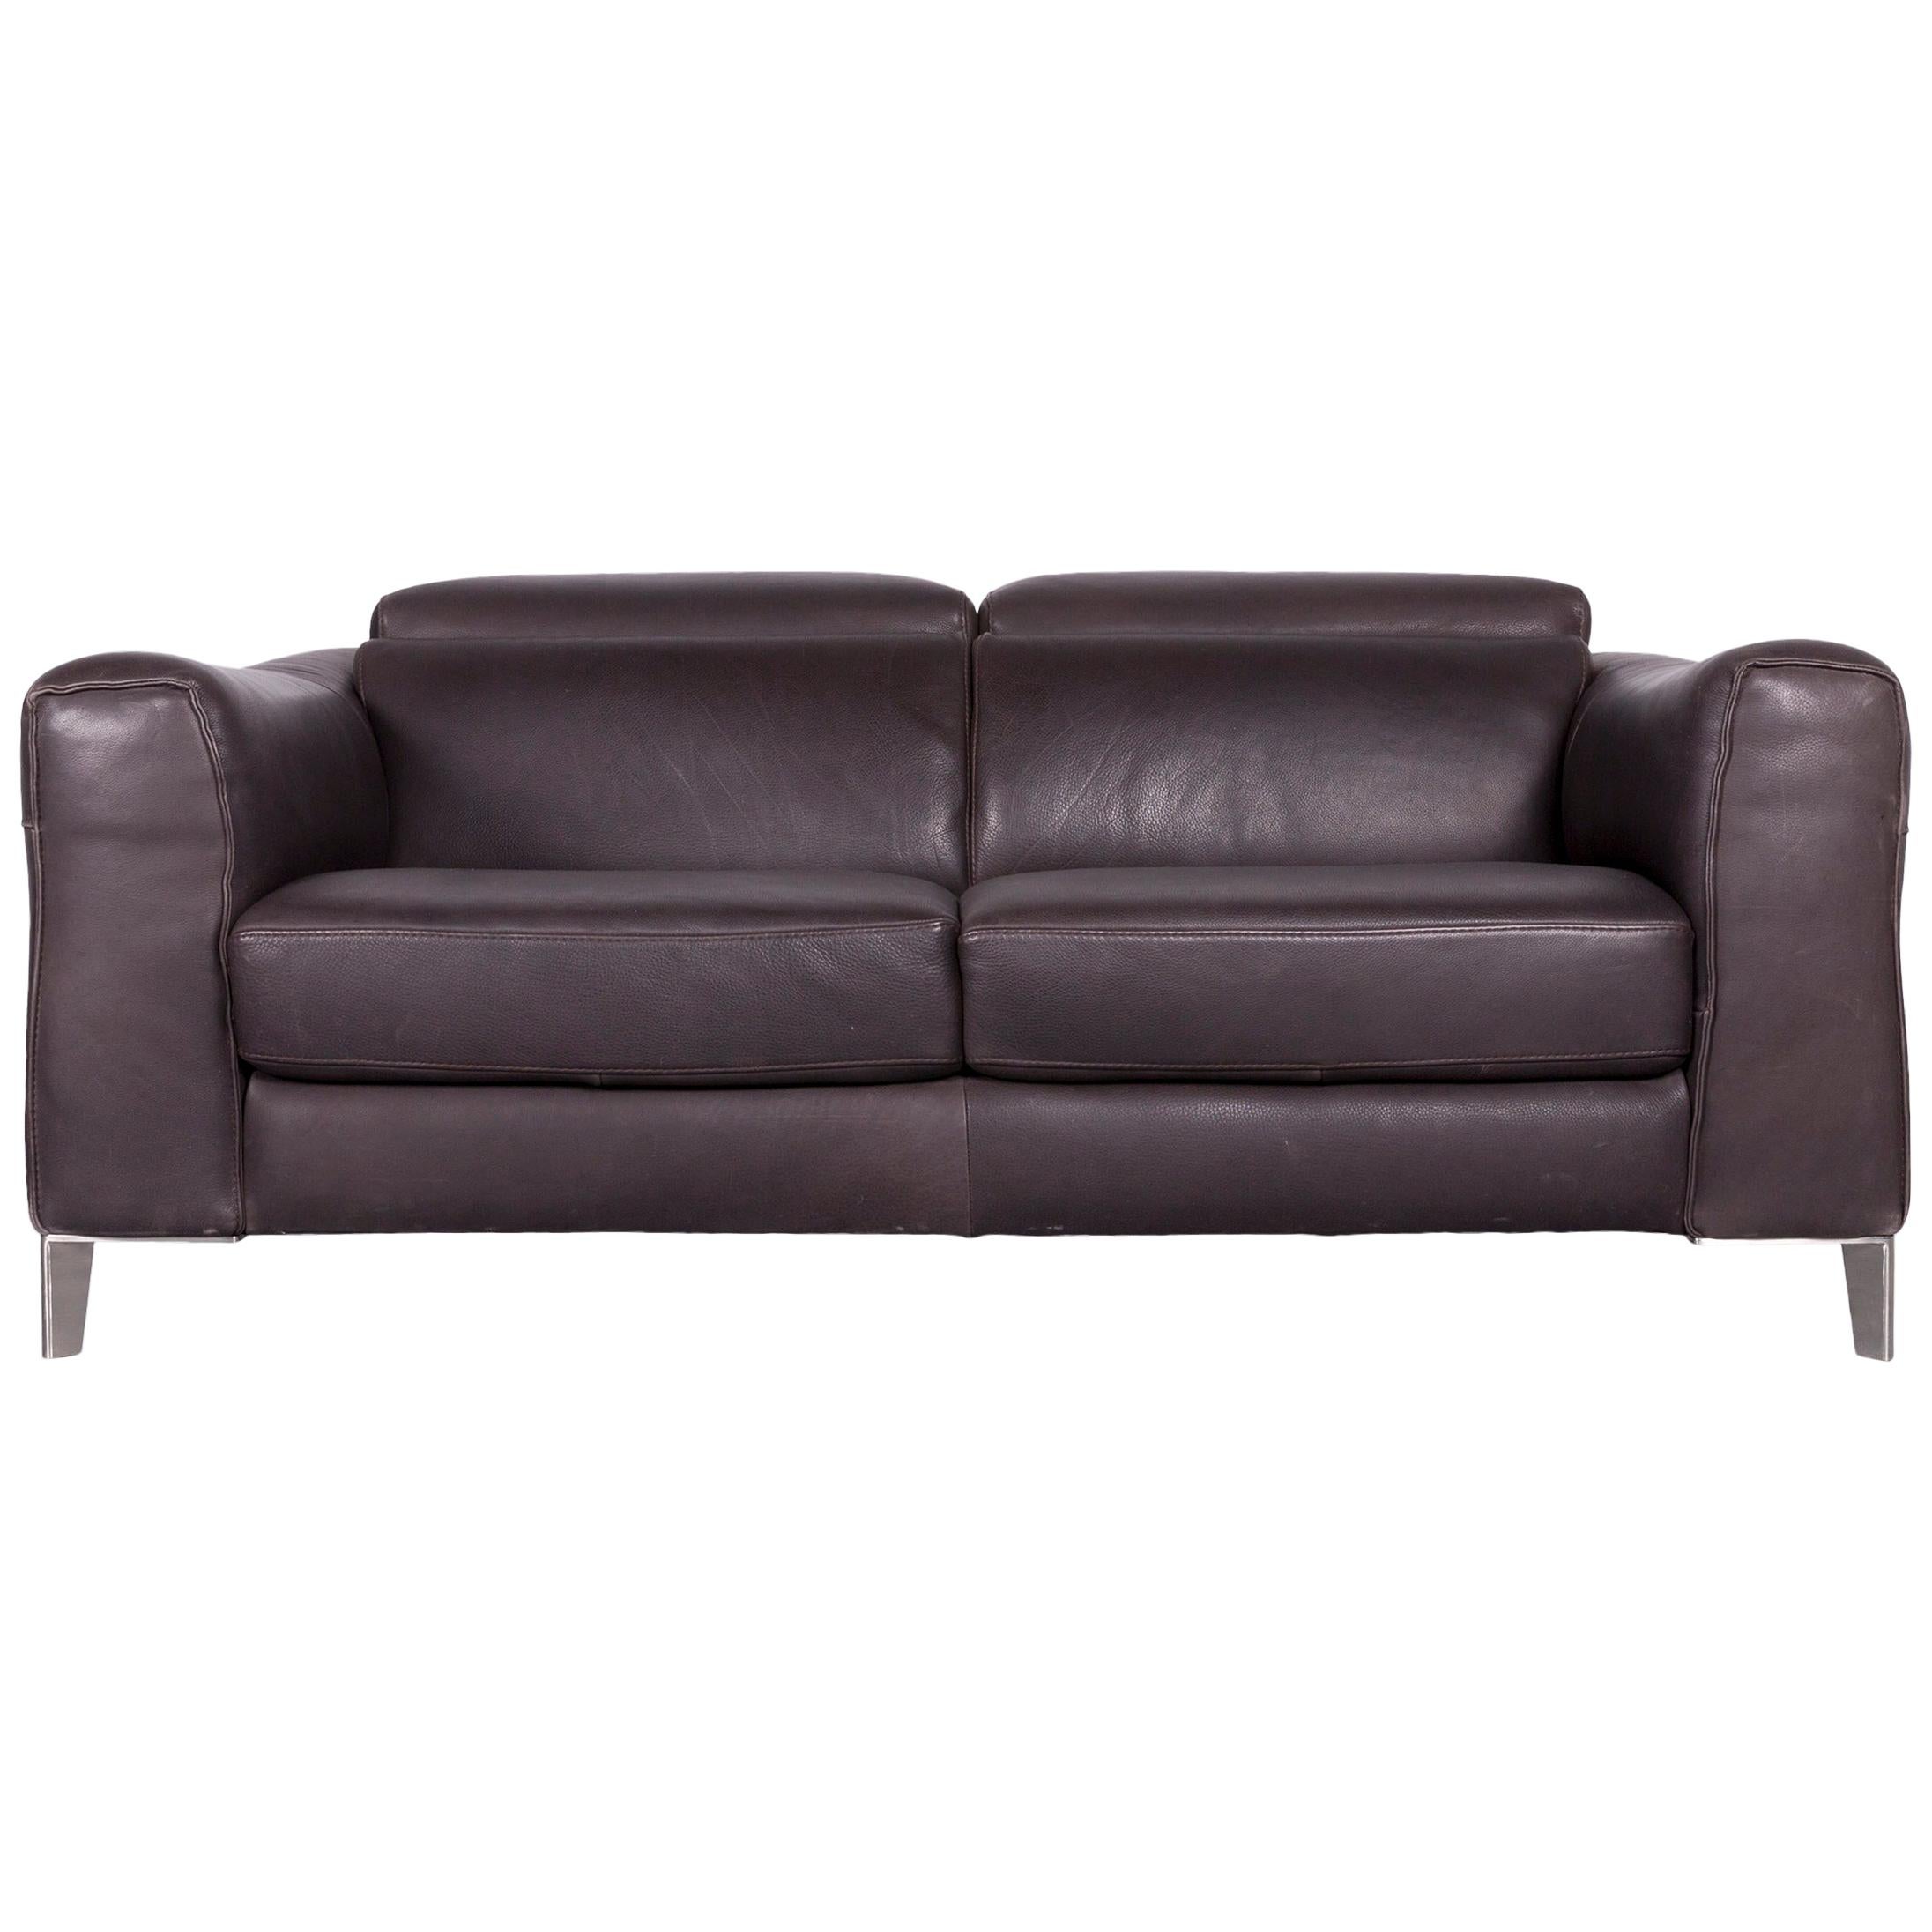 Natuzzi Designer Leather Sofa Two-Seat Couch Brown